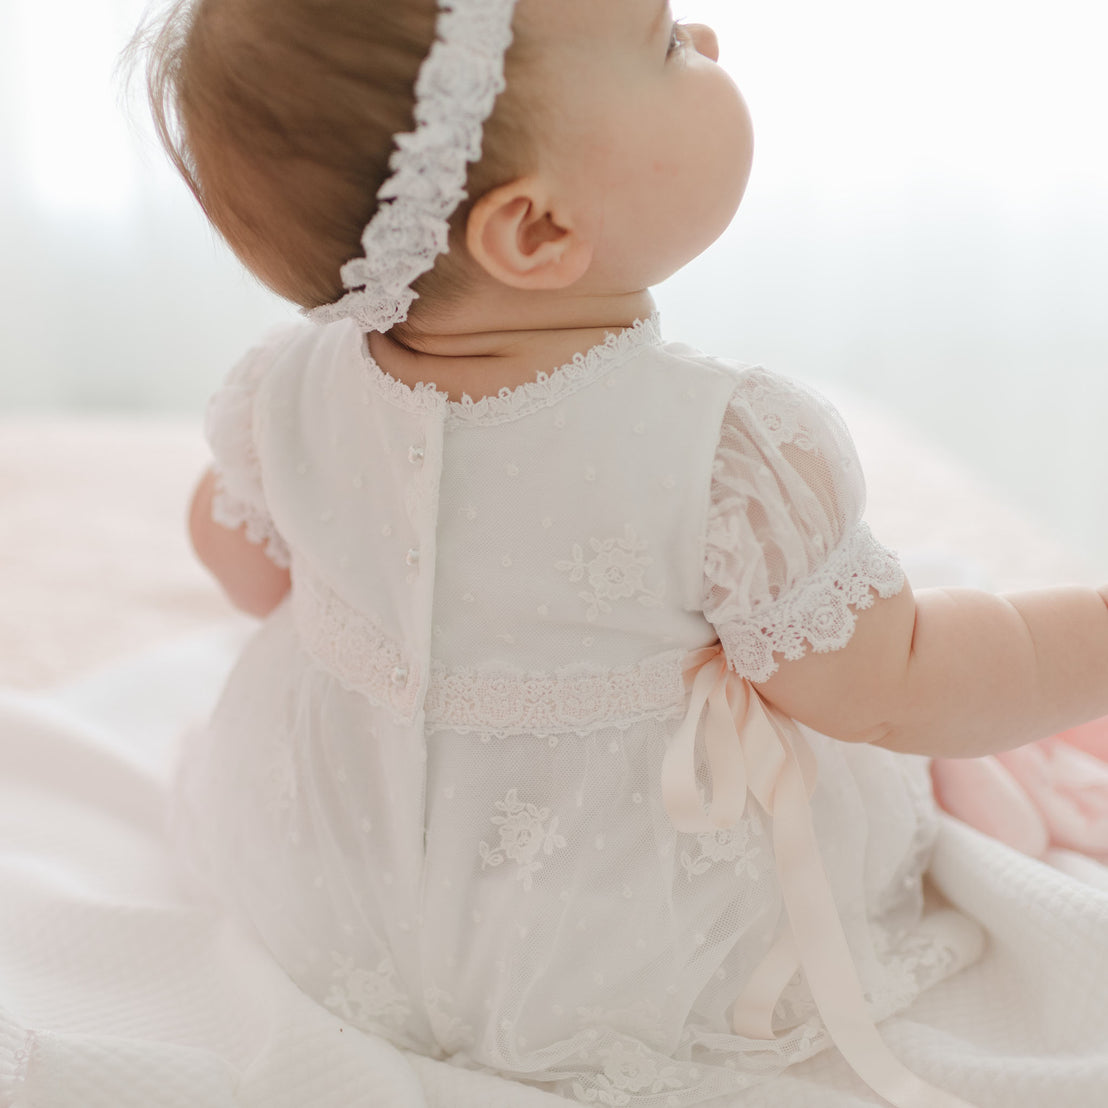 A baby wearing a white Melissa Christening Gown & Bonnet with intricate Venice lace trim and a white headband sits on a soft surface, back to the camera. The dress, handmade in the USA, features detailed lace patterns, buttons, and ribbons. The background is softly blurred.